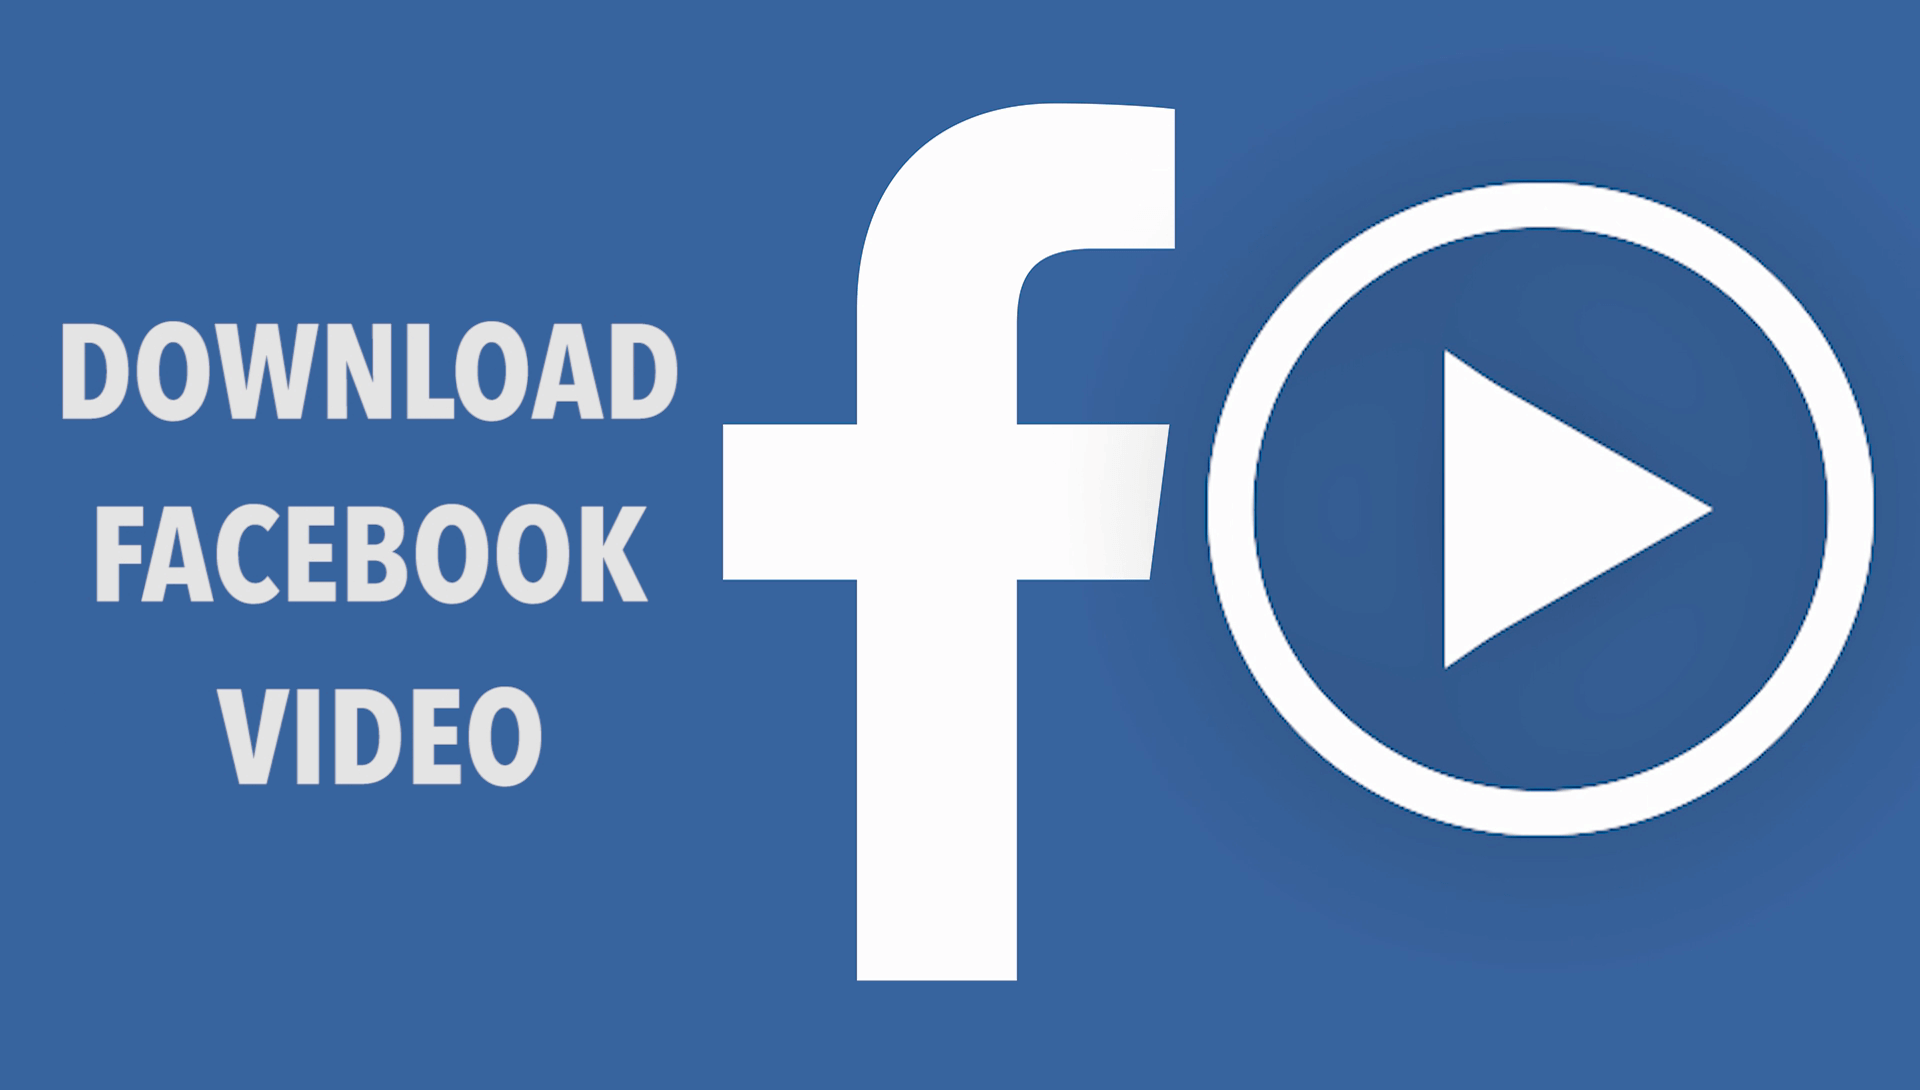 Facebook Video Downloader Emerges as Popular Tool among Americans